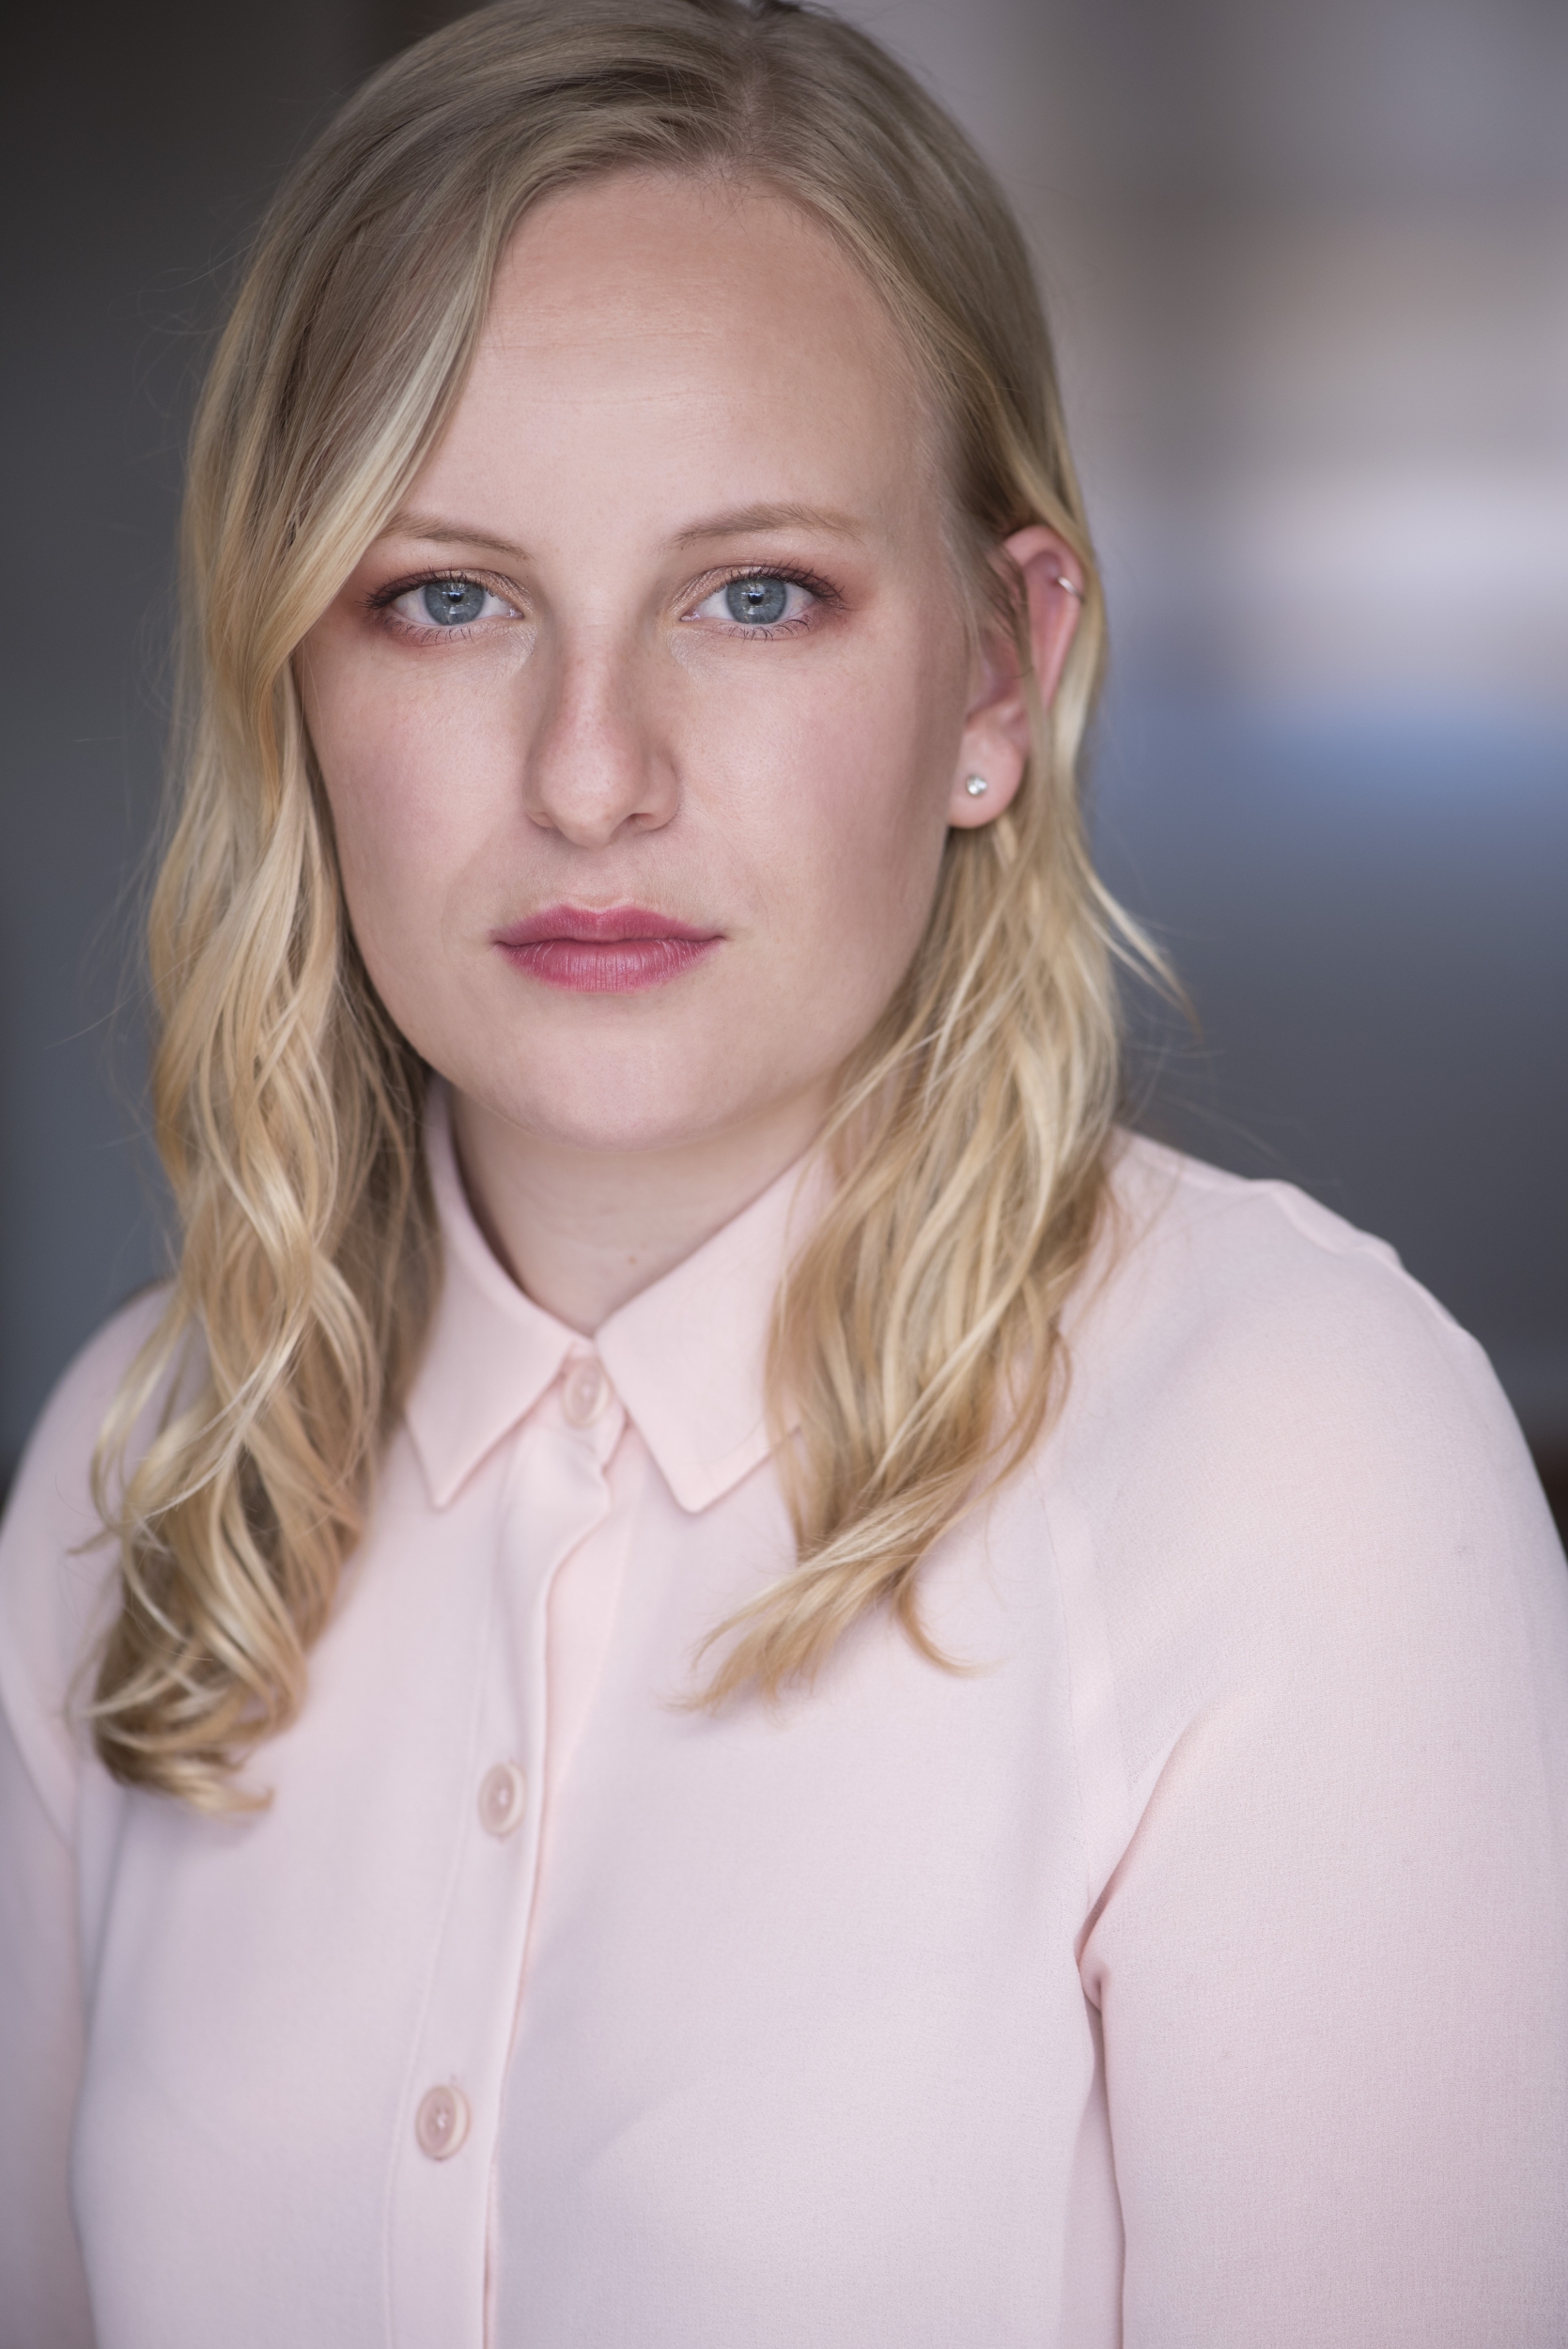 Chloe Greenfield Blonde Actor Headshot Pink Shirt Serious Quirky